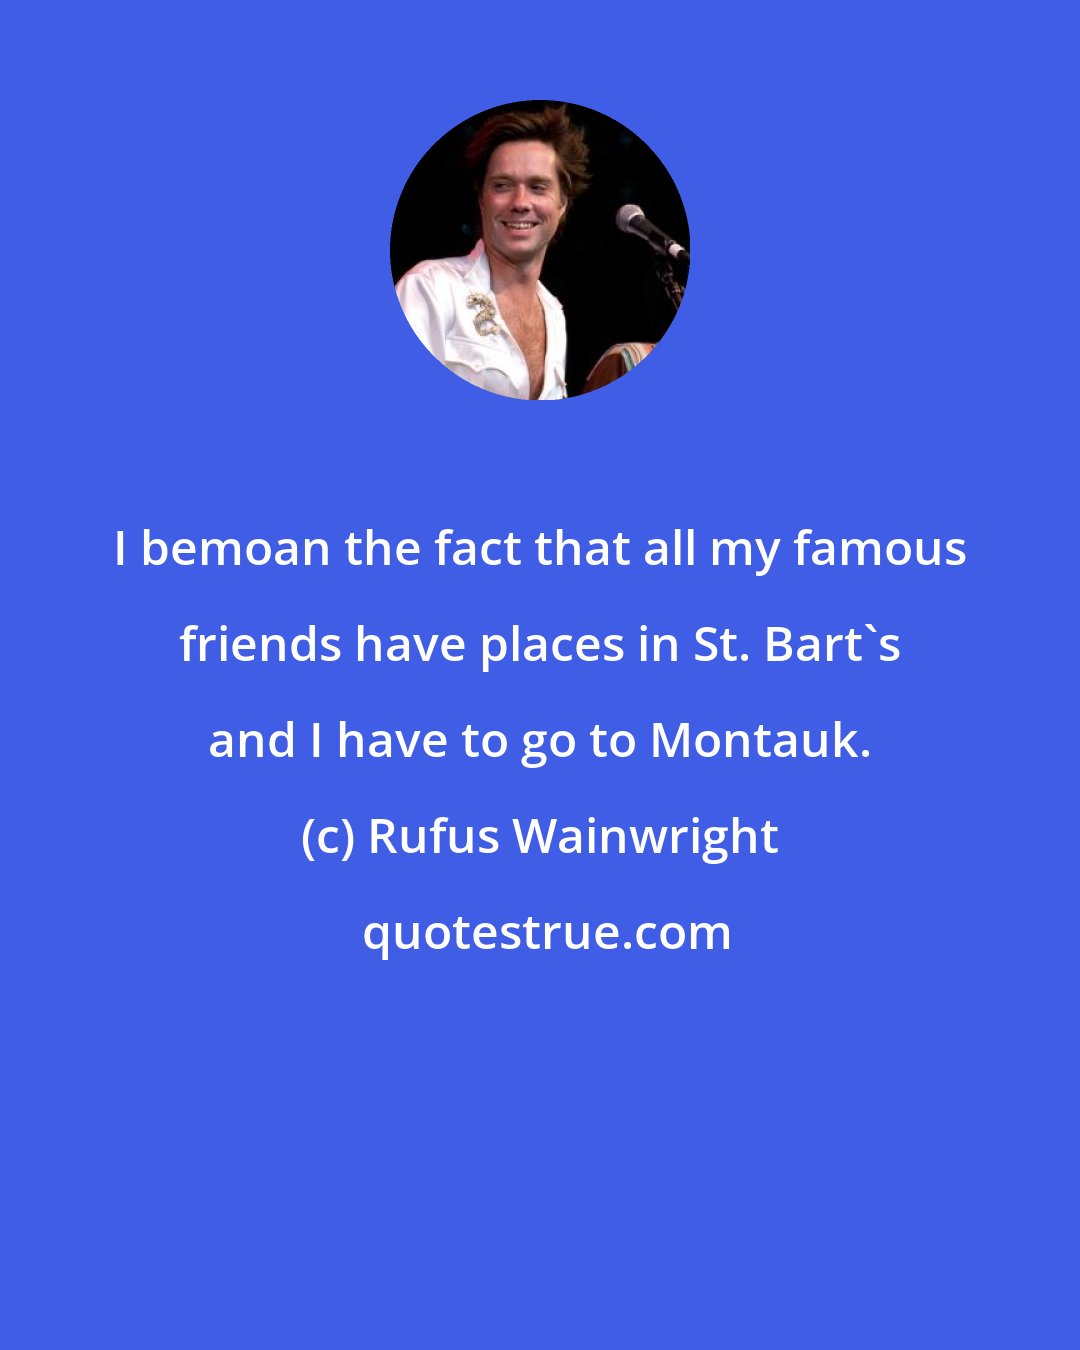 Rufus Wainwright: I bemoan the fact that all my famous friends have places in St. Bart's and I have to go to Montauk.